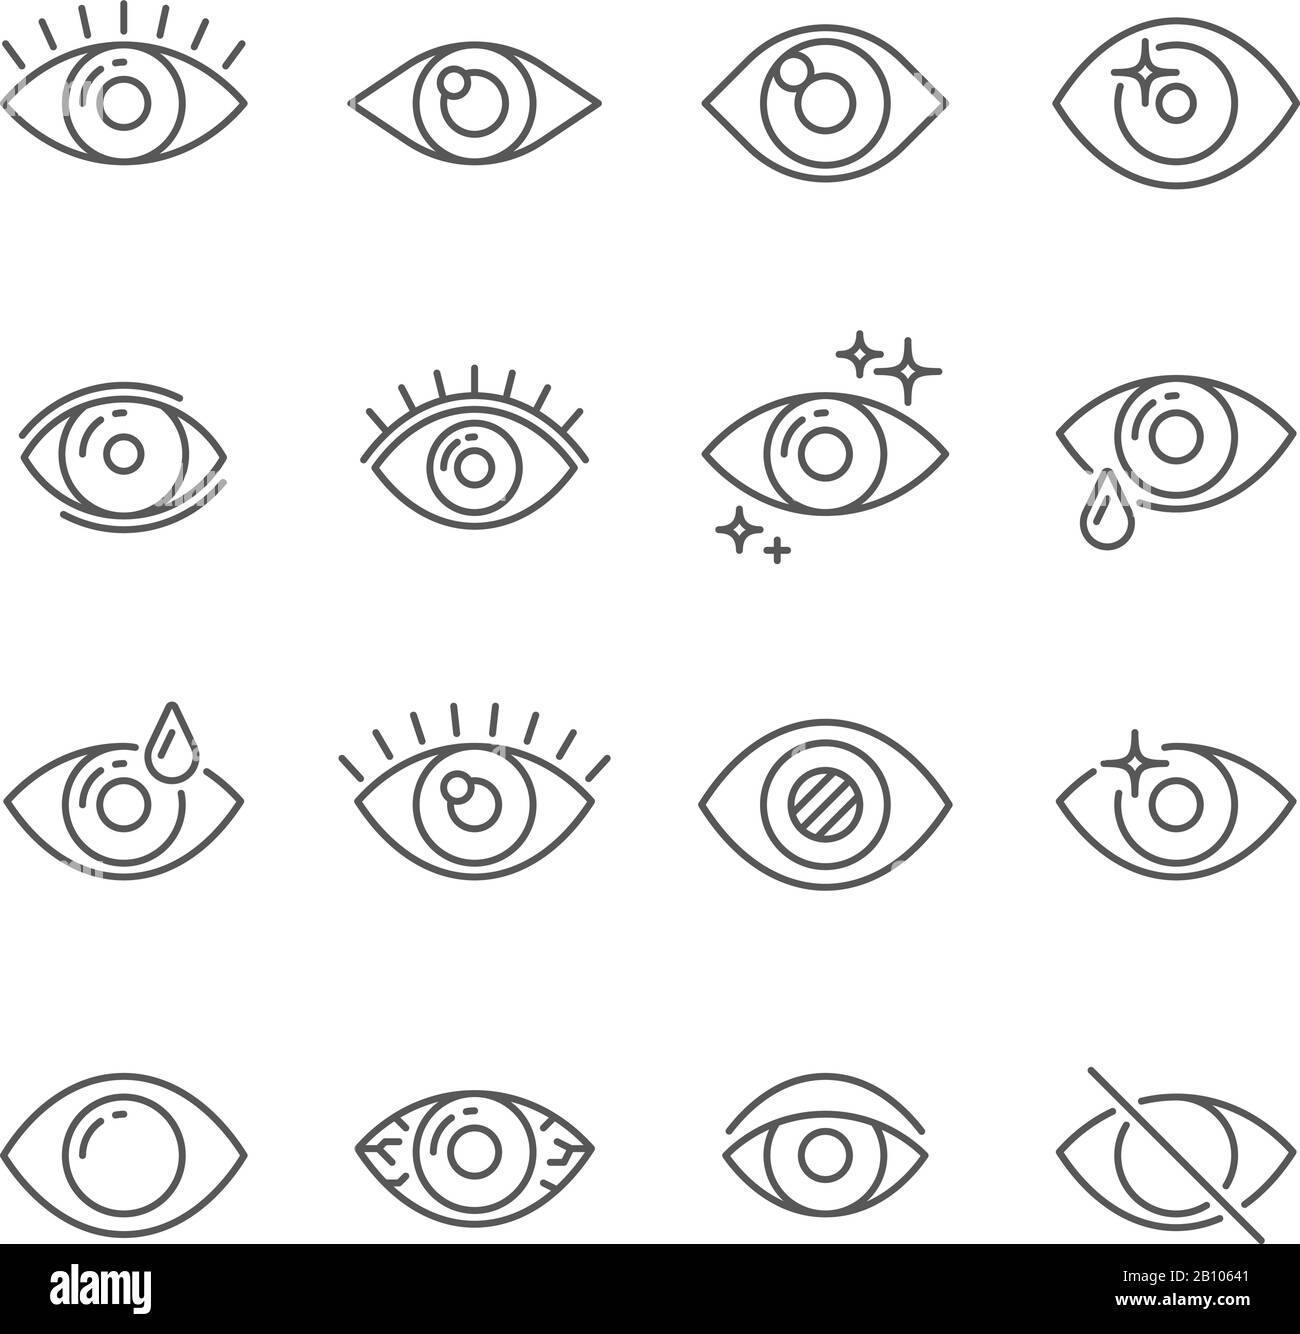 Black pictogram of eyesight or looking eye line icons. Eyeball, watch and eyes with ophthalmic lenses outline vector icon collection Stock Vector